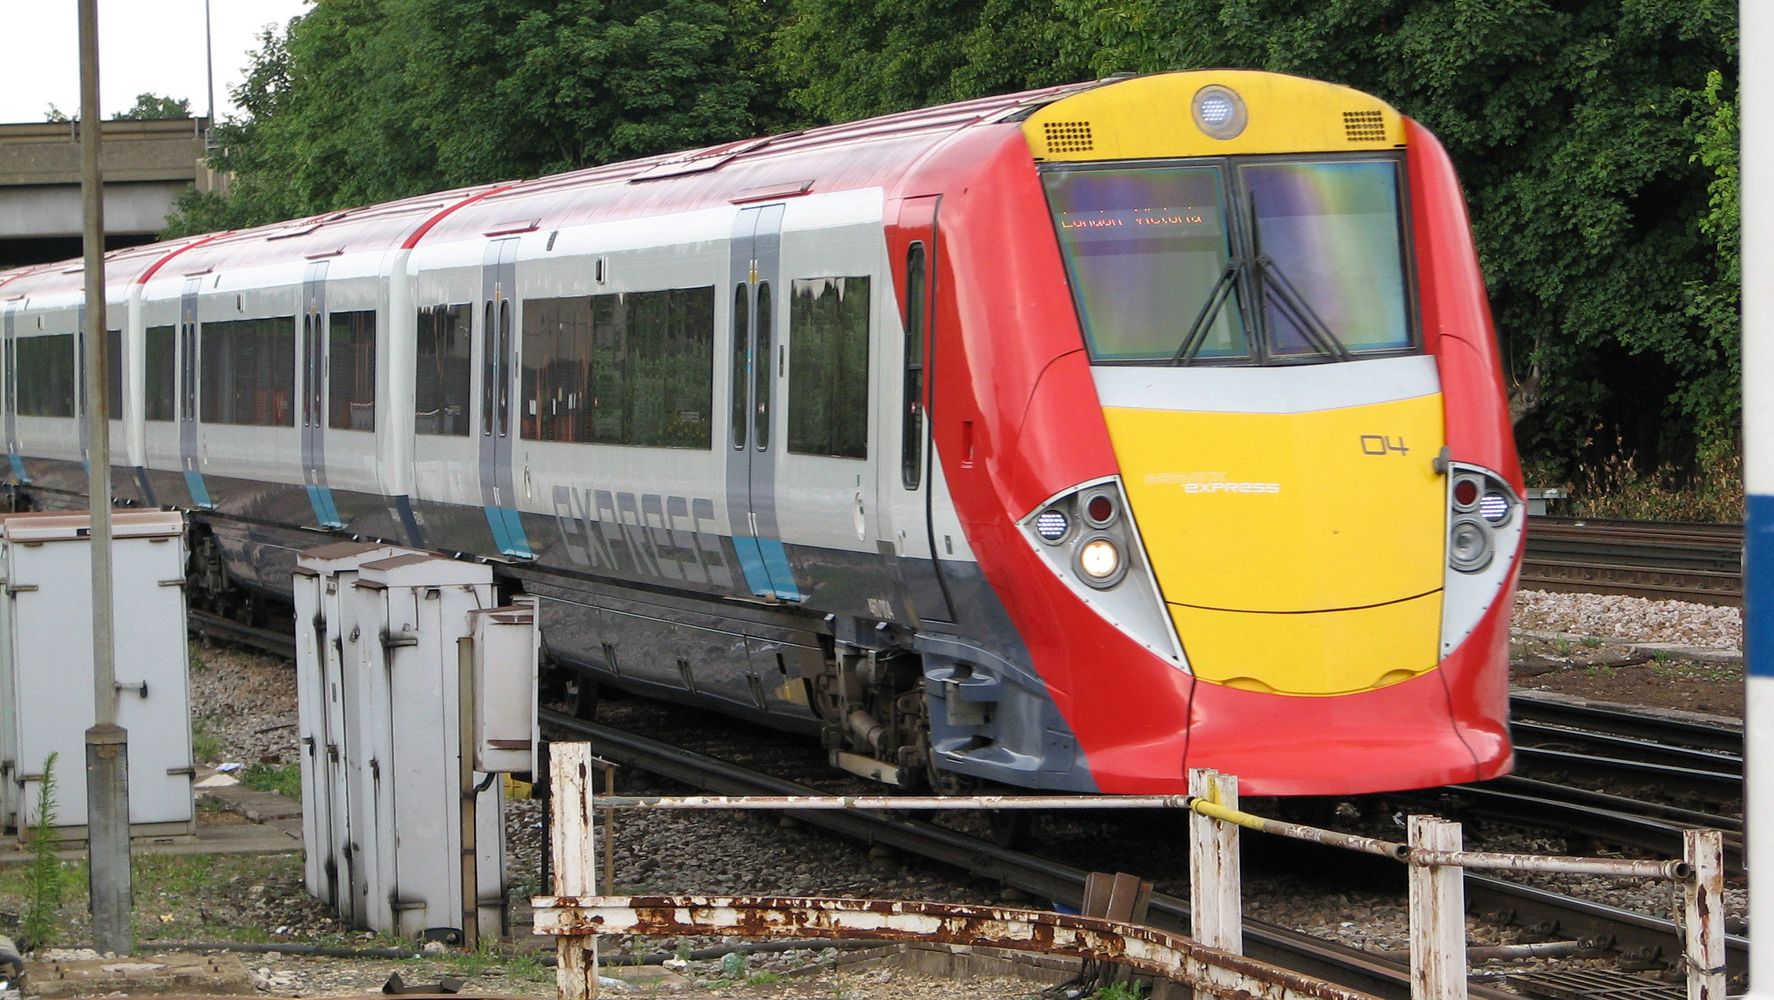 Southern And Gatwick Express Rail Services Face Fresh Strike Threat In  Dispute Over Jobs And Pay | HuffPost UK News